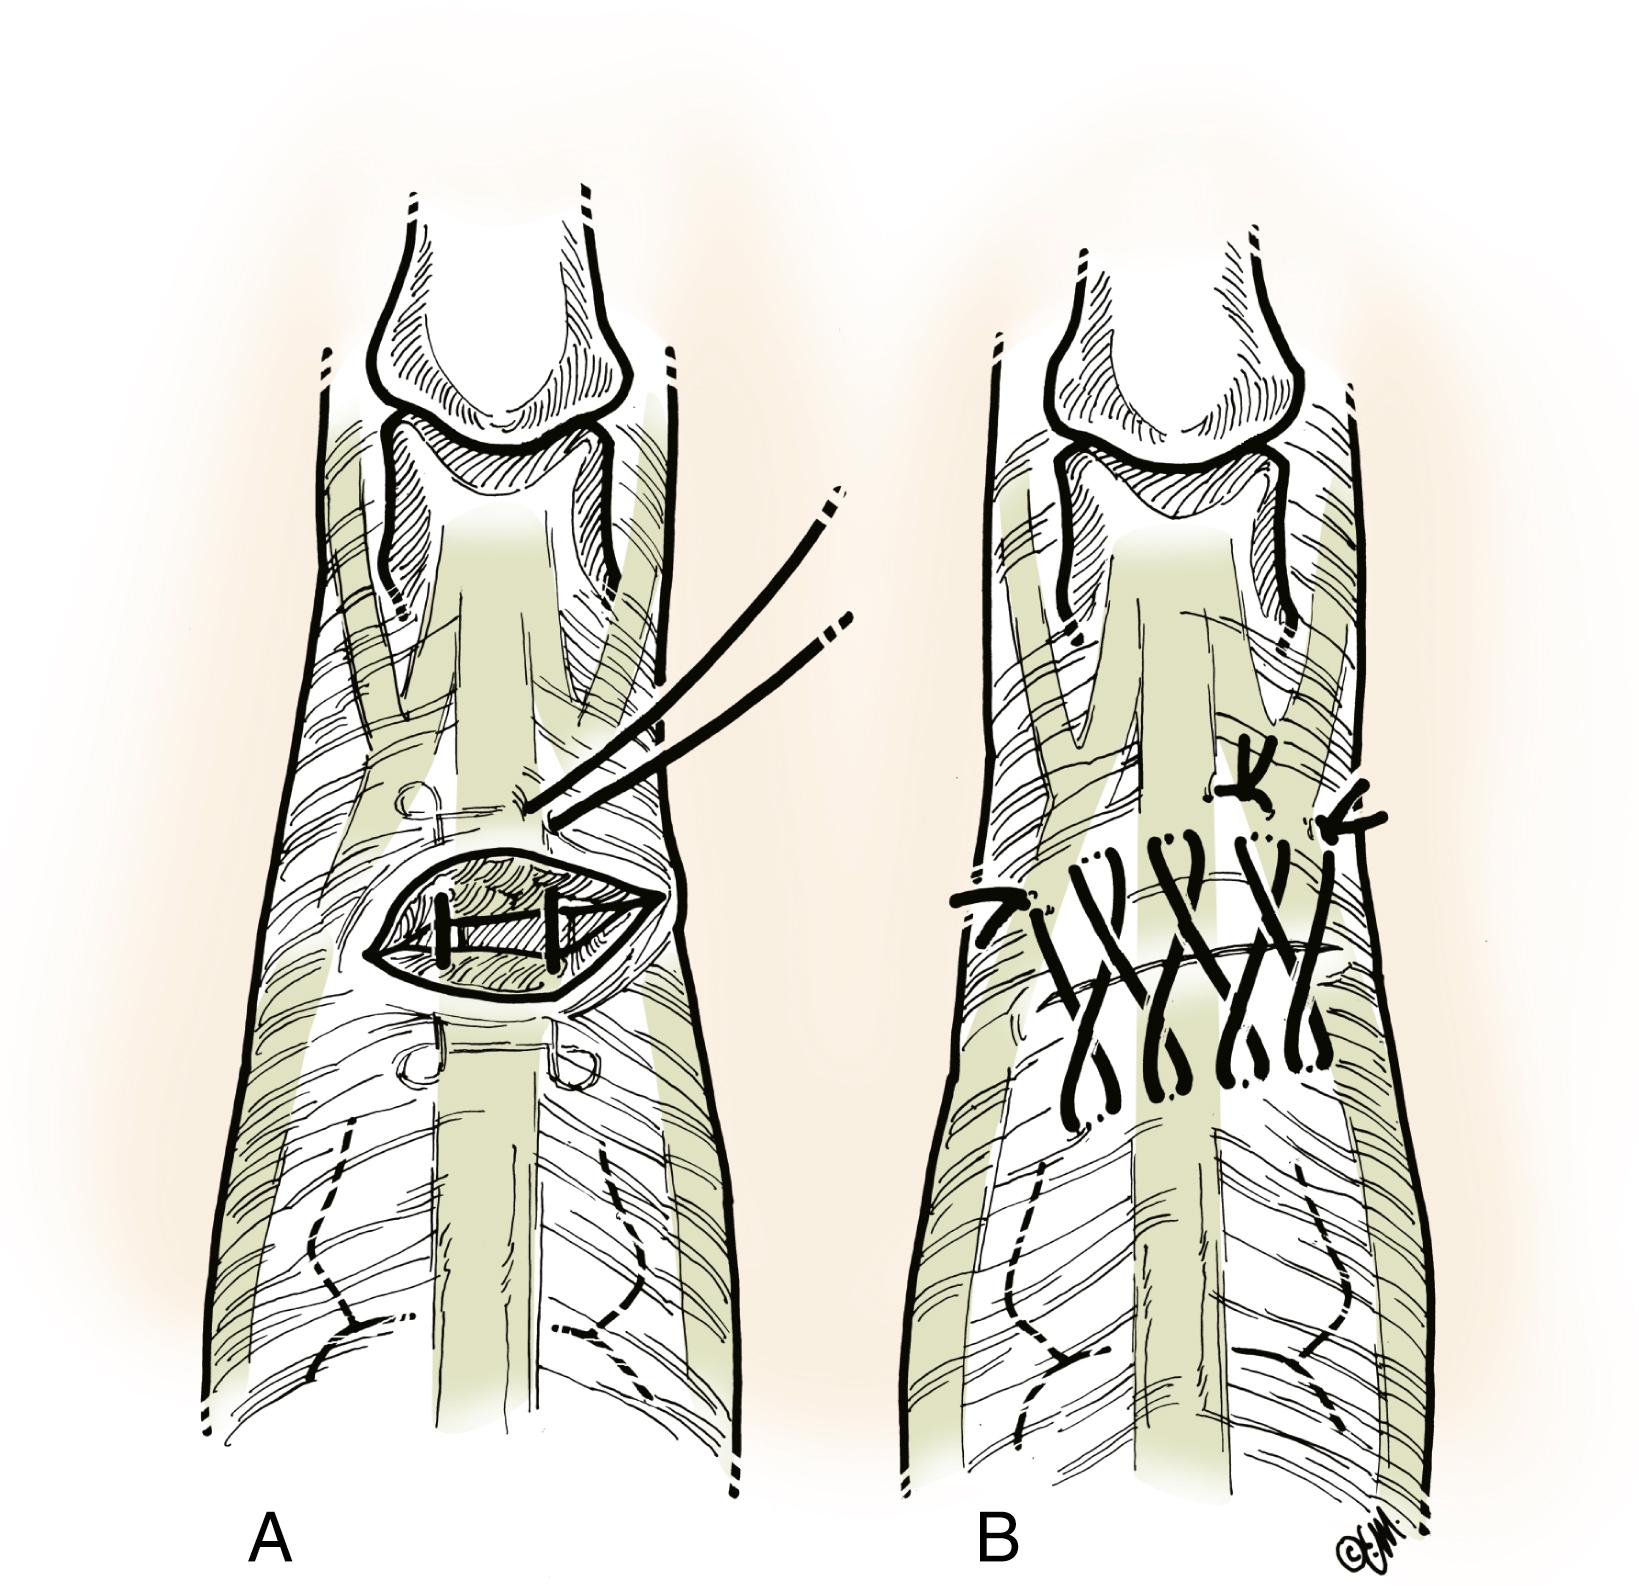 Fig. 5.13, The author’s recommended technique for suture of zone 4 extensor tendon injuries. A, Modified Kessler suture is centered over the laceration and tied with suitable tension to avoid gapping or undue shortening of the tendon. The distance between longitudinal components of the suture is adjusted to avoid side-to-side “bunching” or shortening. Alternatively, two modified Kessler core sutures may be placed to avoid bunching of the repair. The relative increased thickness of lateral bands is used for placement of the longitudinal portions of the suture to obtain maximal holding power. B, The suture is “finished” with a cross-stitch to augment the repair further. This repair is well suited to the curvature of the extensor tendon over the proximal phalanx and the relative thinness of the tendon.